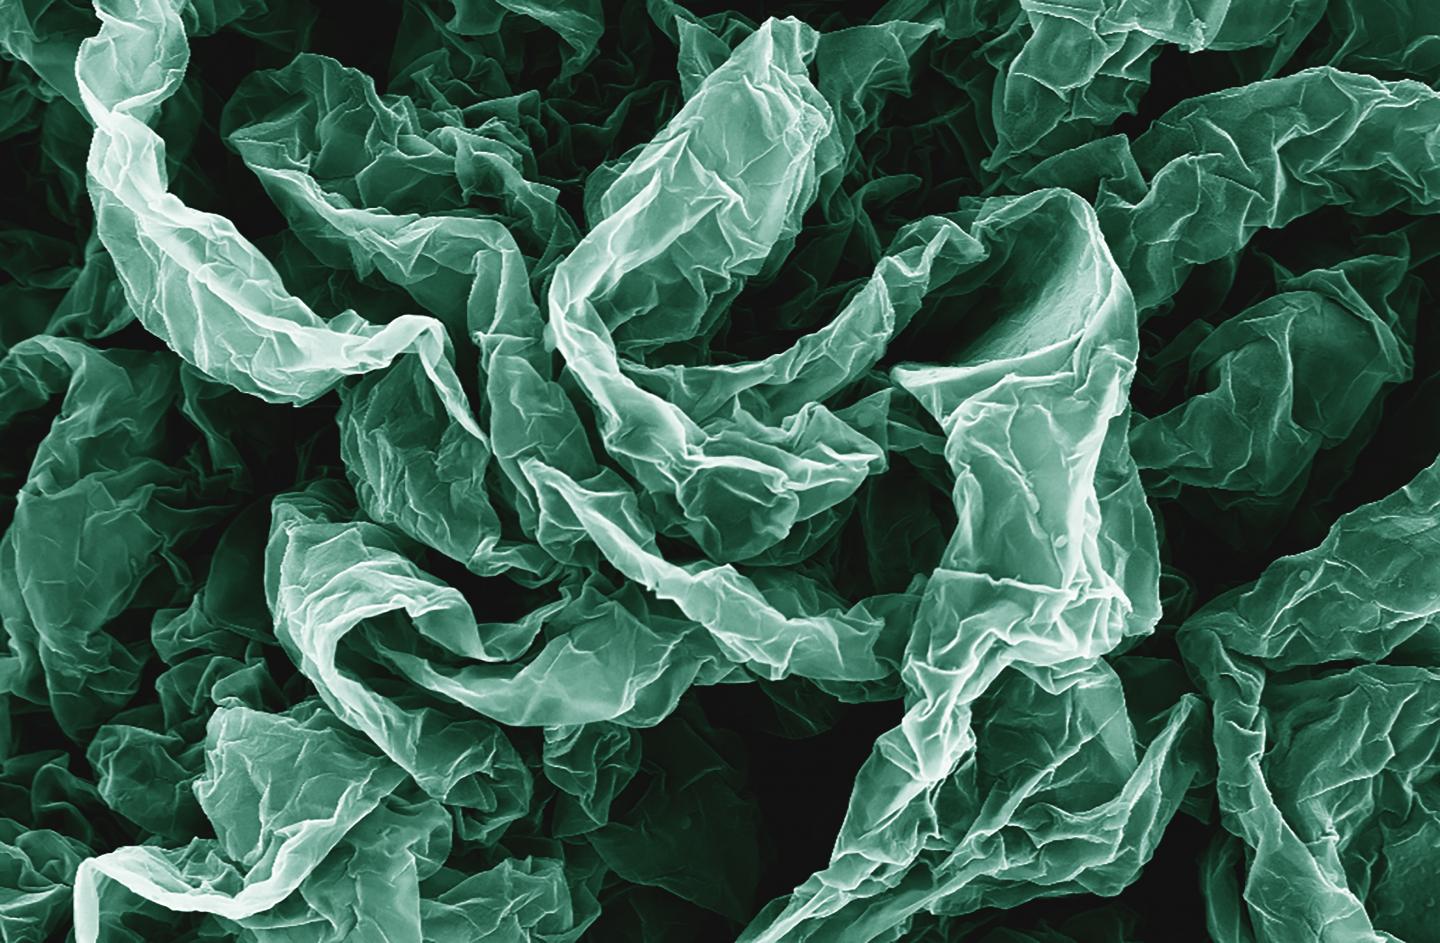 Caption: Wrinkles and crumples, introduced by placing graphene on shrinky polymers, can enhance graphene's properties. Credit: Hurt and Wong Labs / Brown University